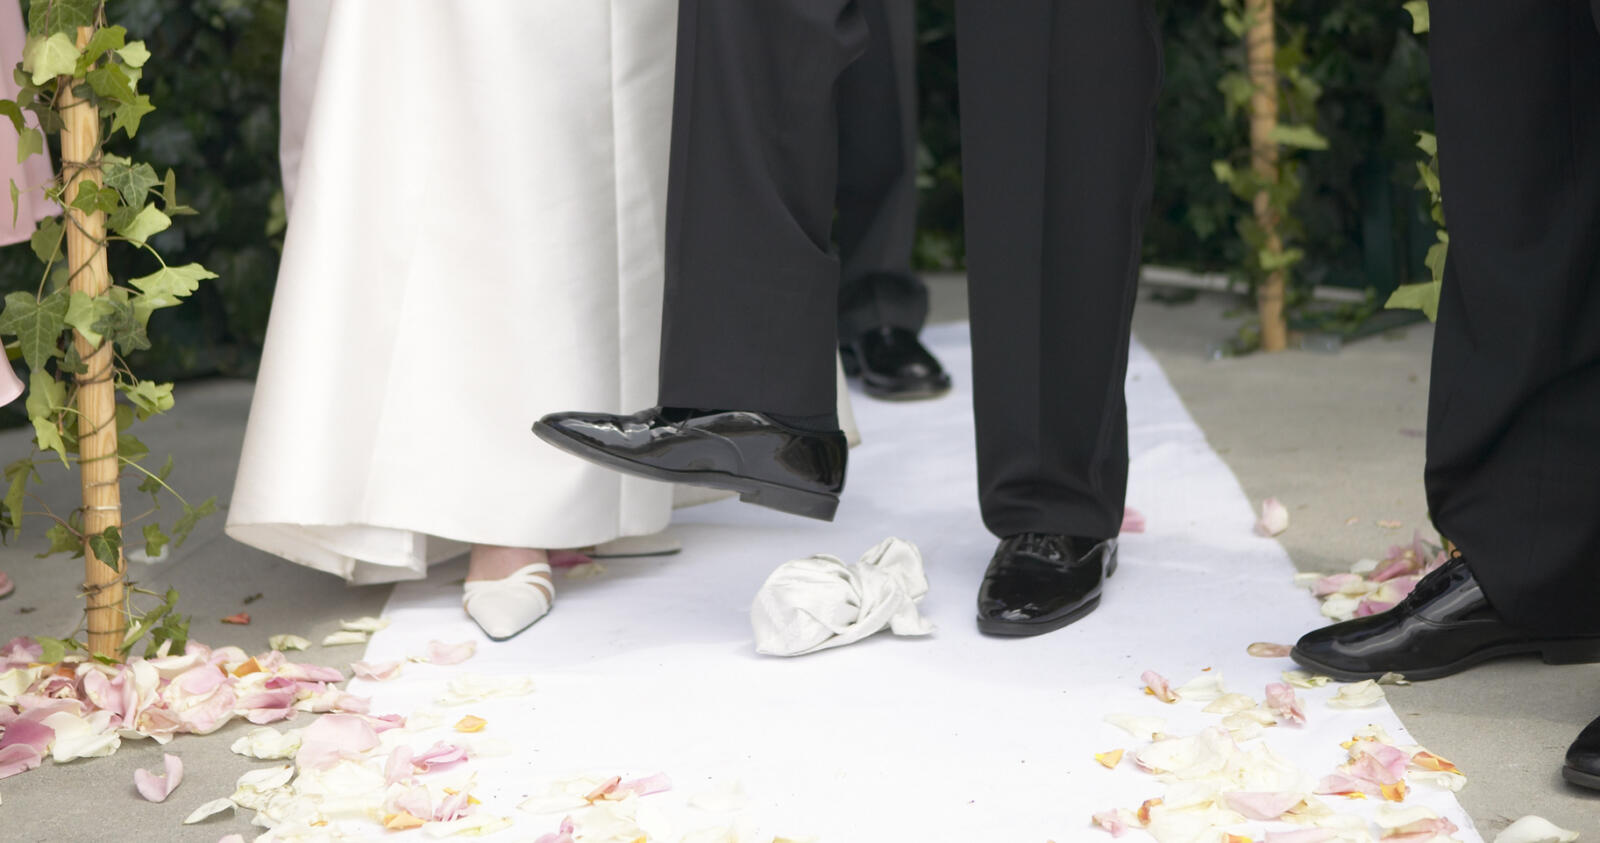 groom stomping on a glass at a jewish wedding